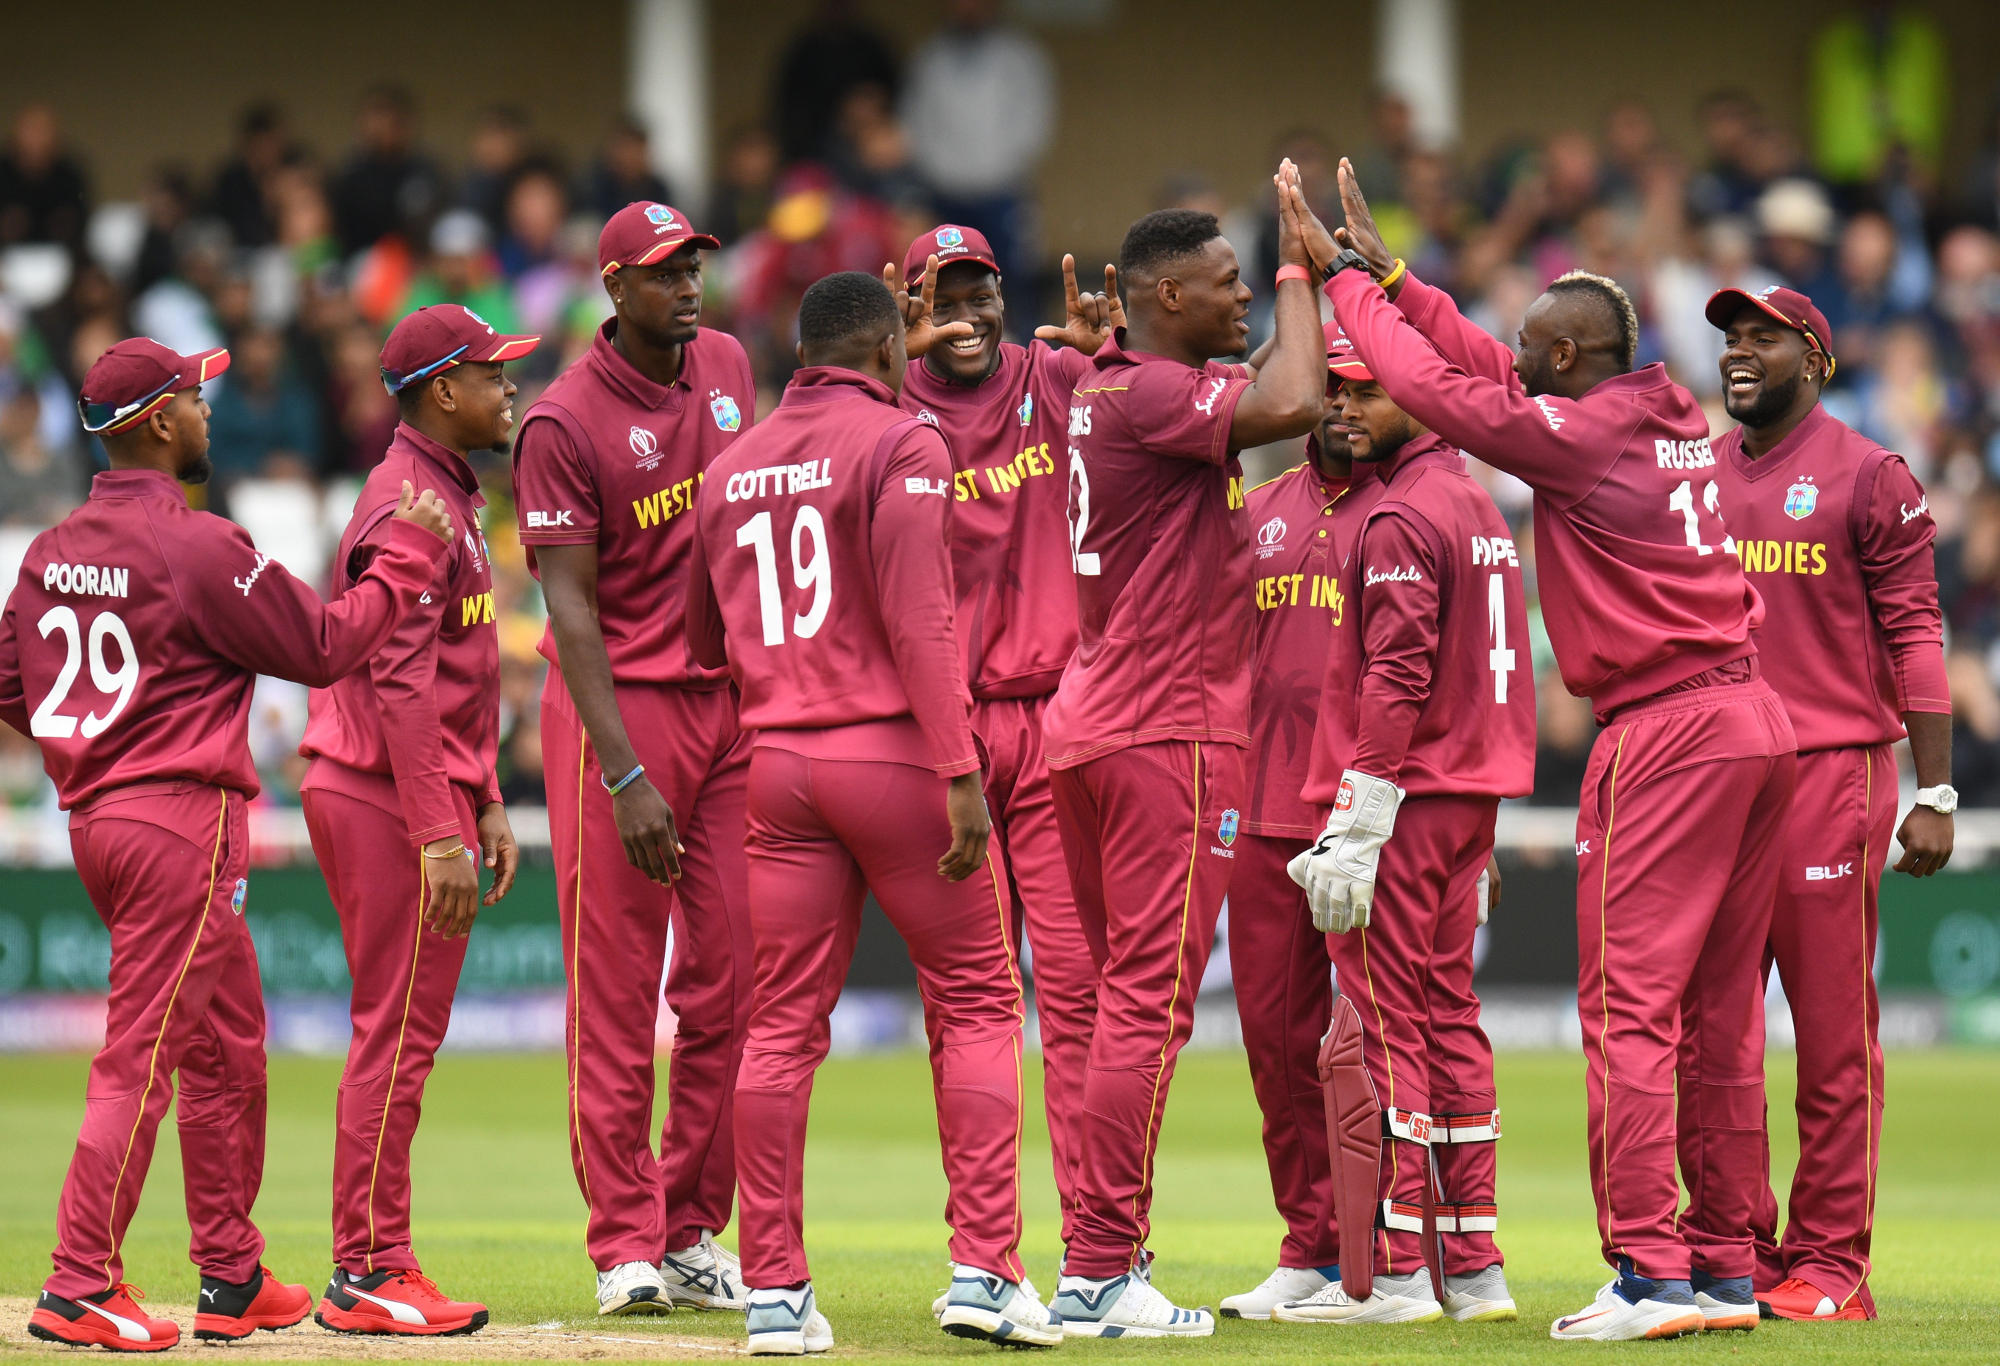 The West Indies celebrate a wicket at the Cricket World Cup.